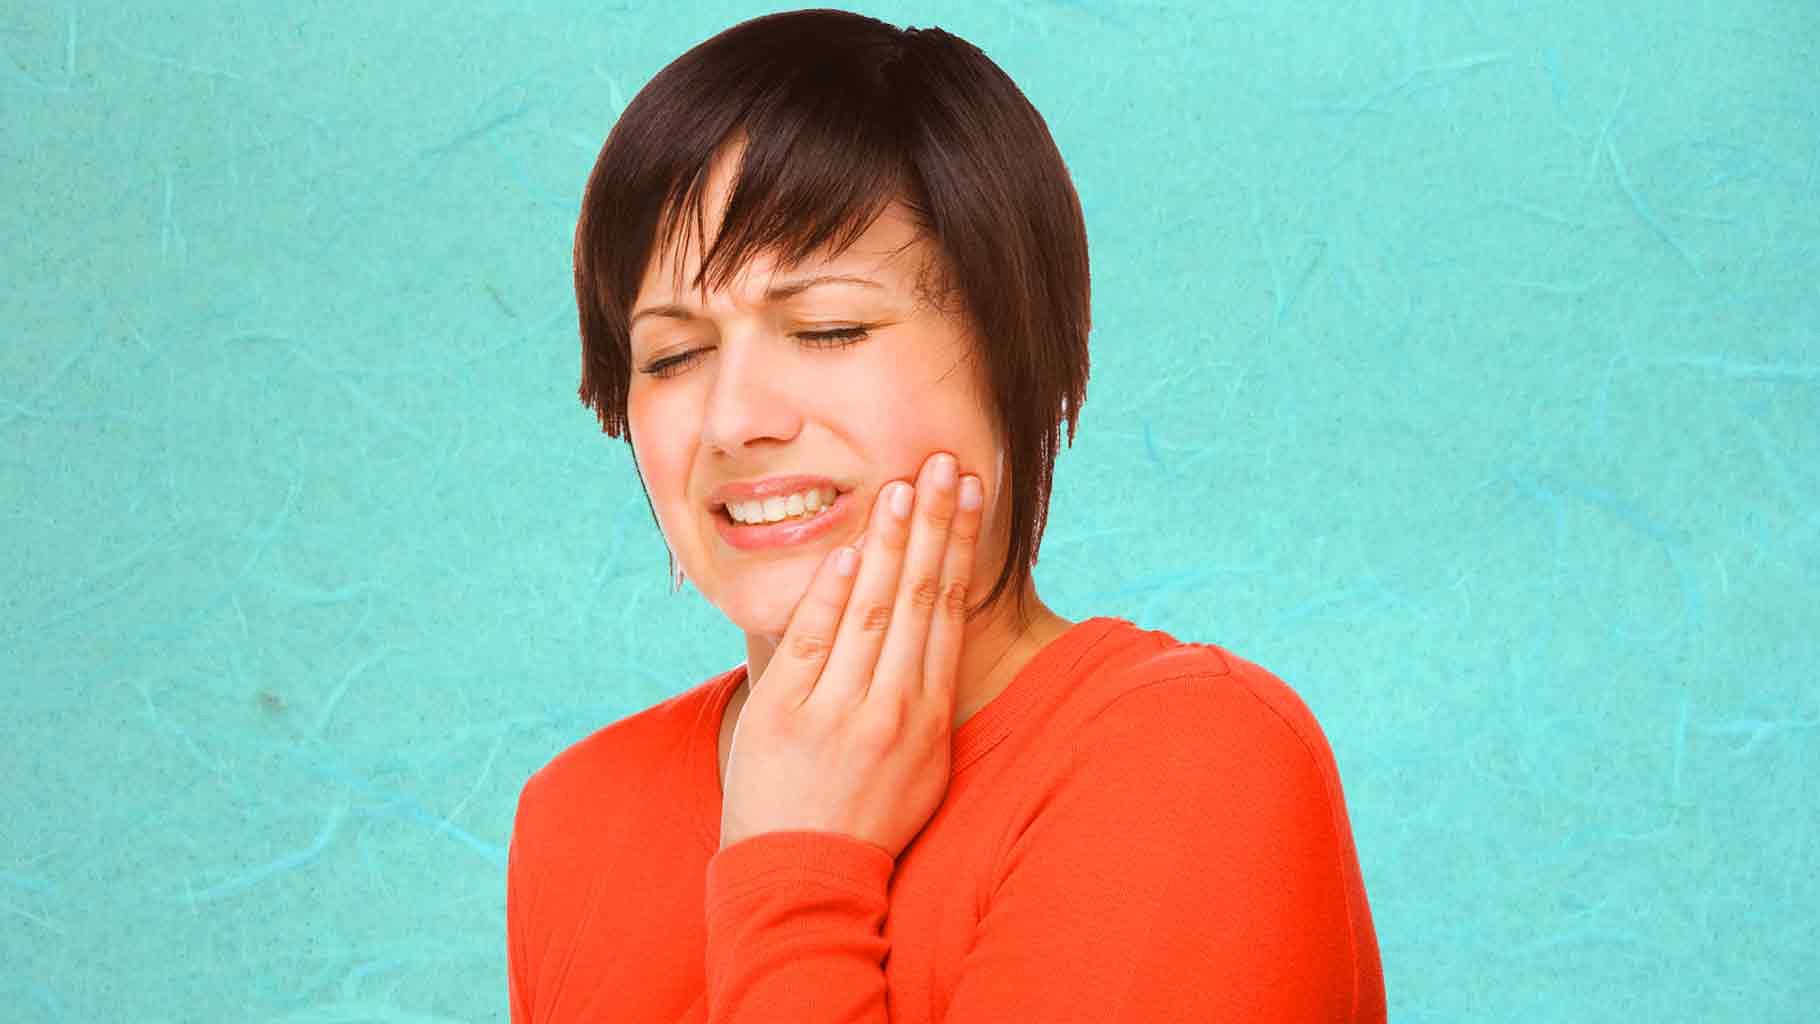 5 Home Remedies For Toothache: Toothaches are usually a result of tooth decay, tooth abscess, damaged fillings or infected gums.